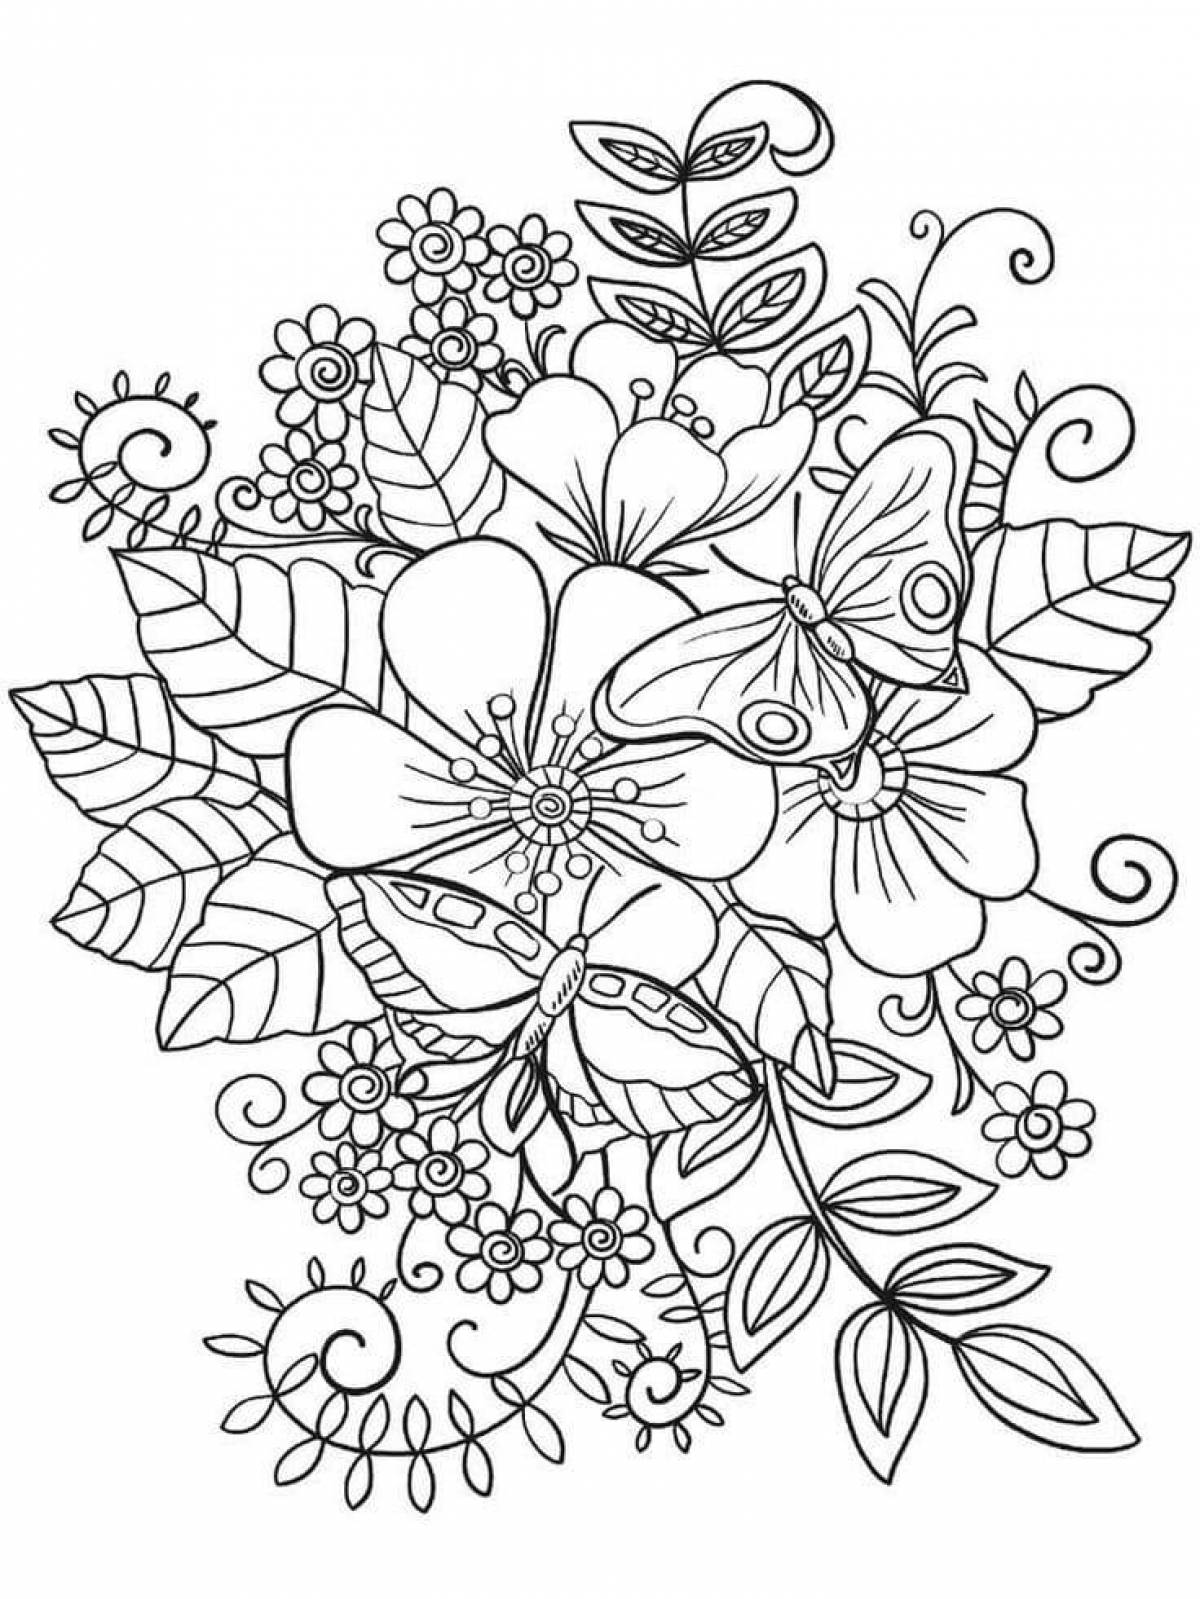 Coloring flowers for girls